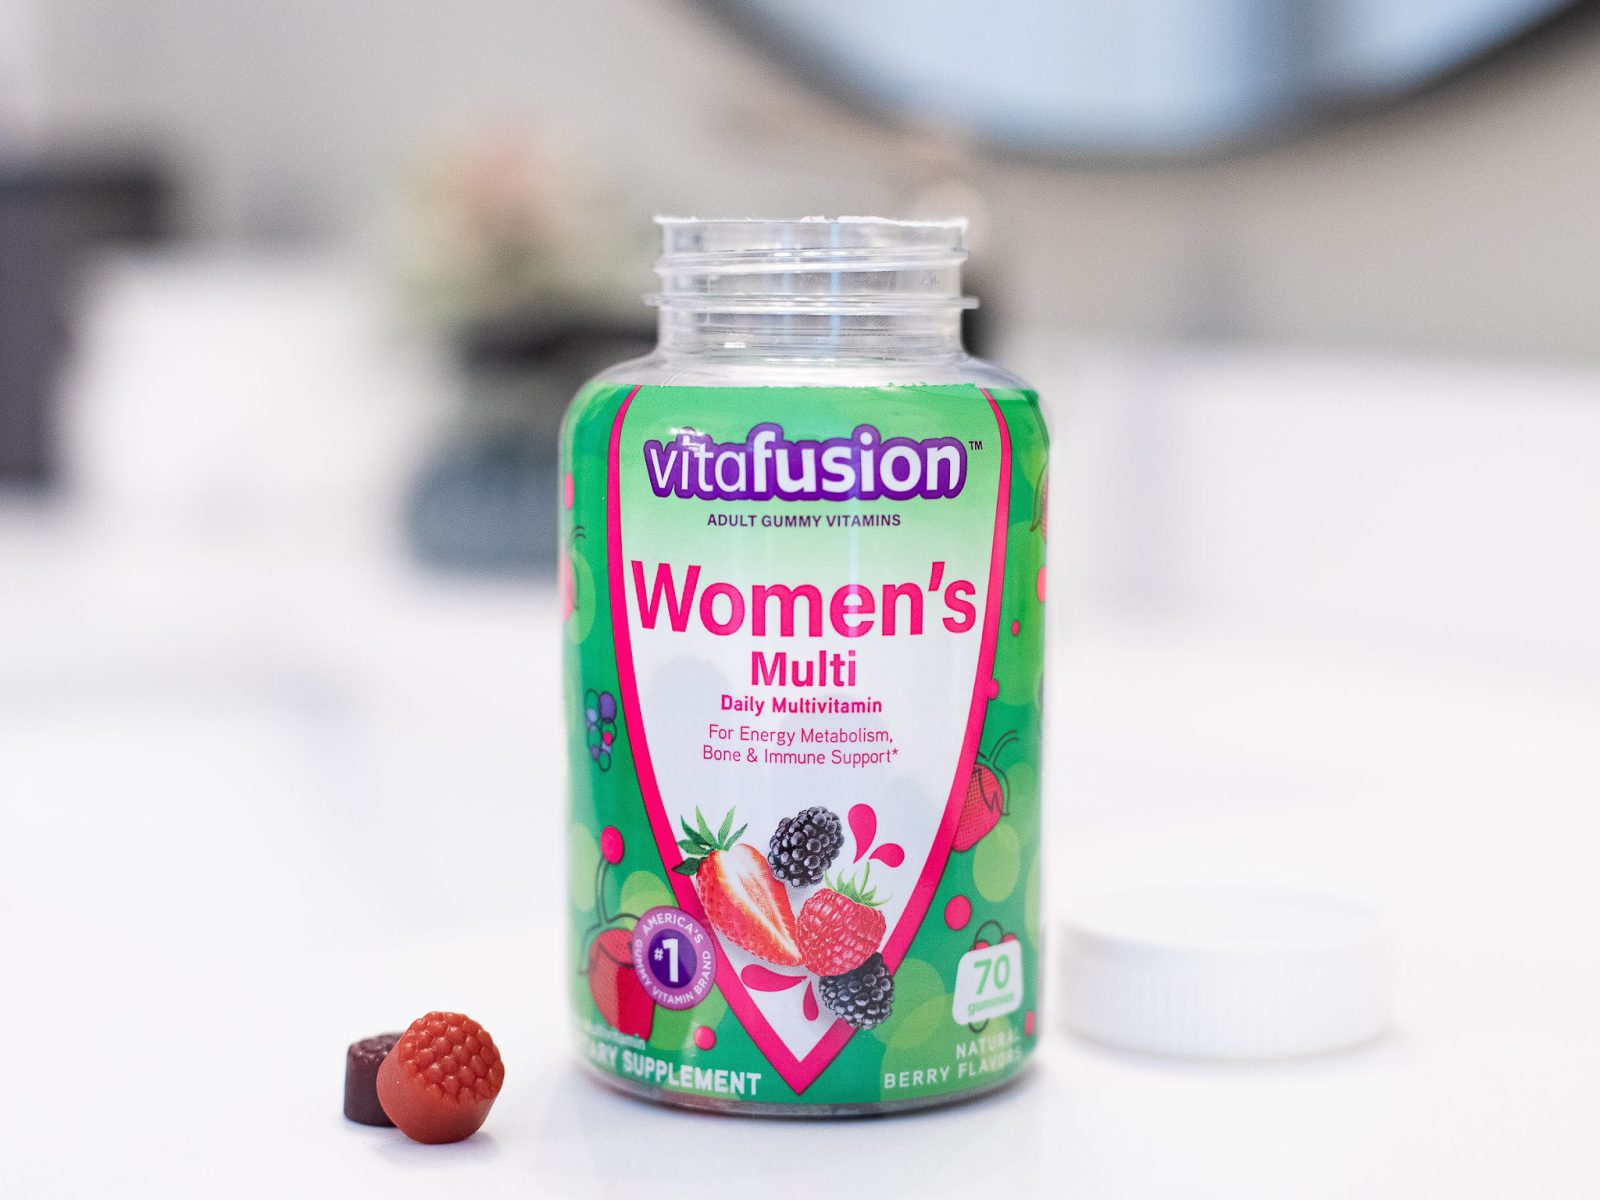 Vitafusion Vitamins As Low As 89¢ (Regular Price $8.39) – Plus L’il Critters Vitamin As Low As 99¢ At Publix